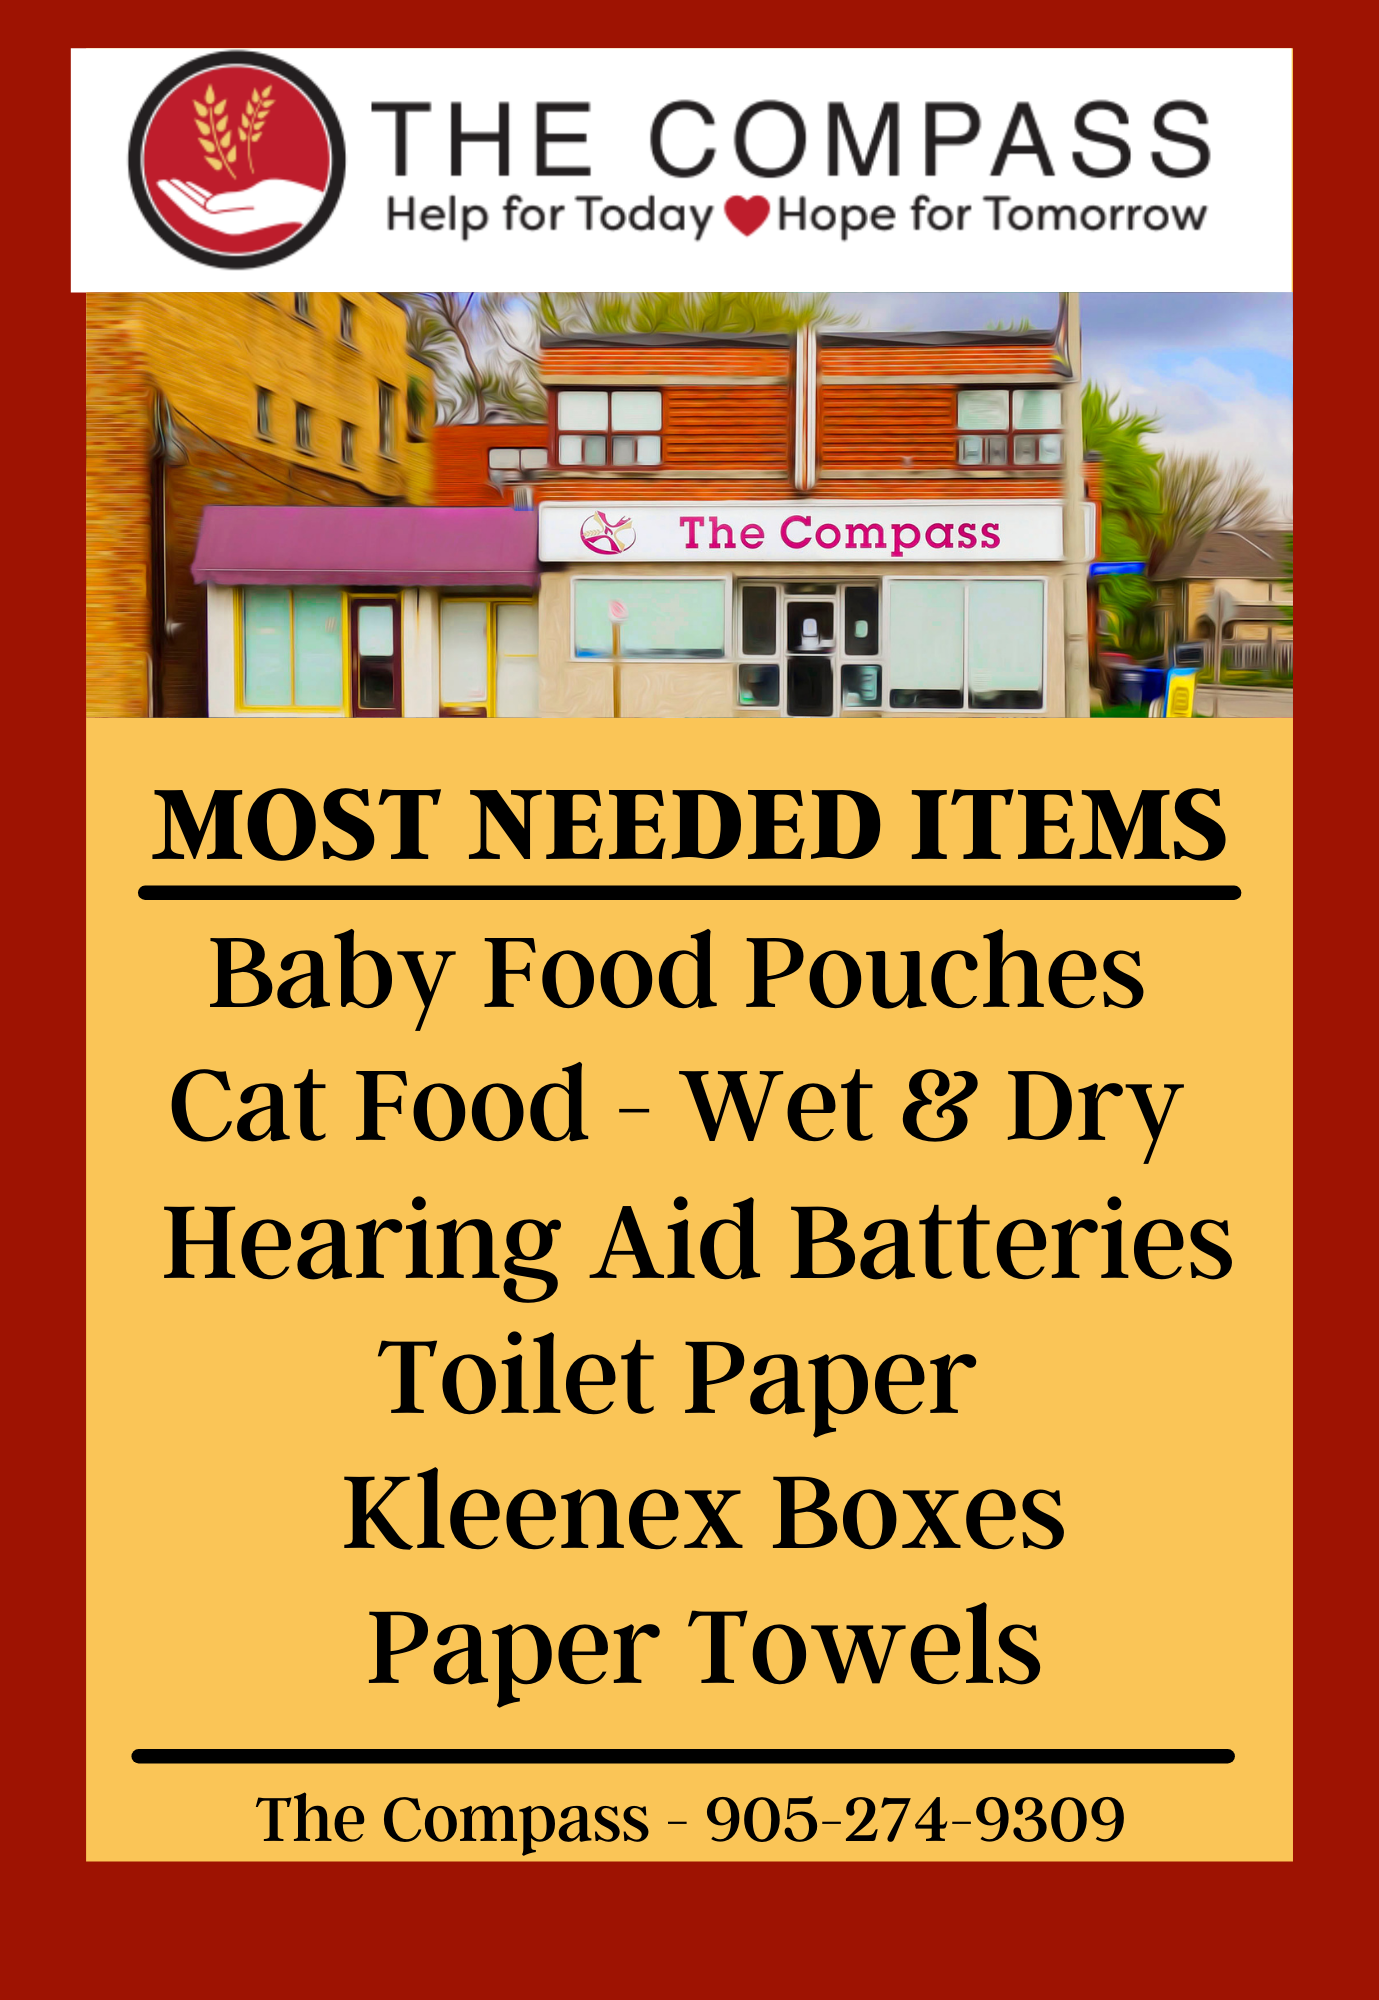 Compass Most Needed Items Jan 11 2022